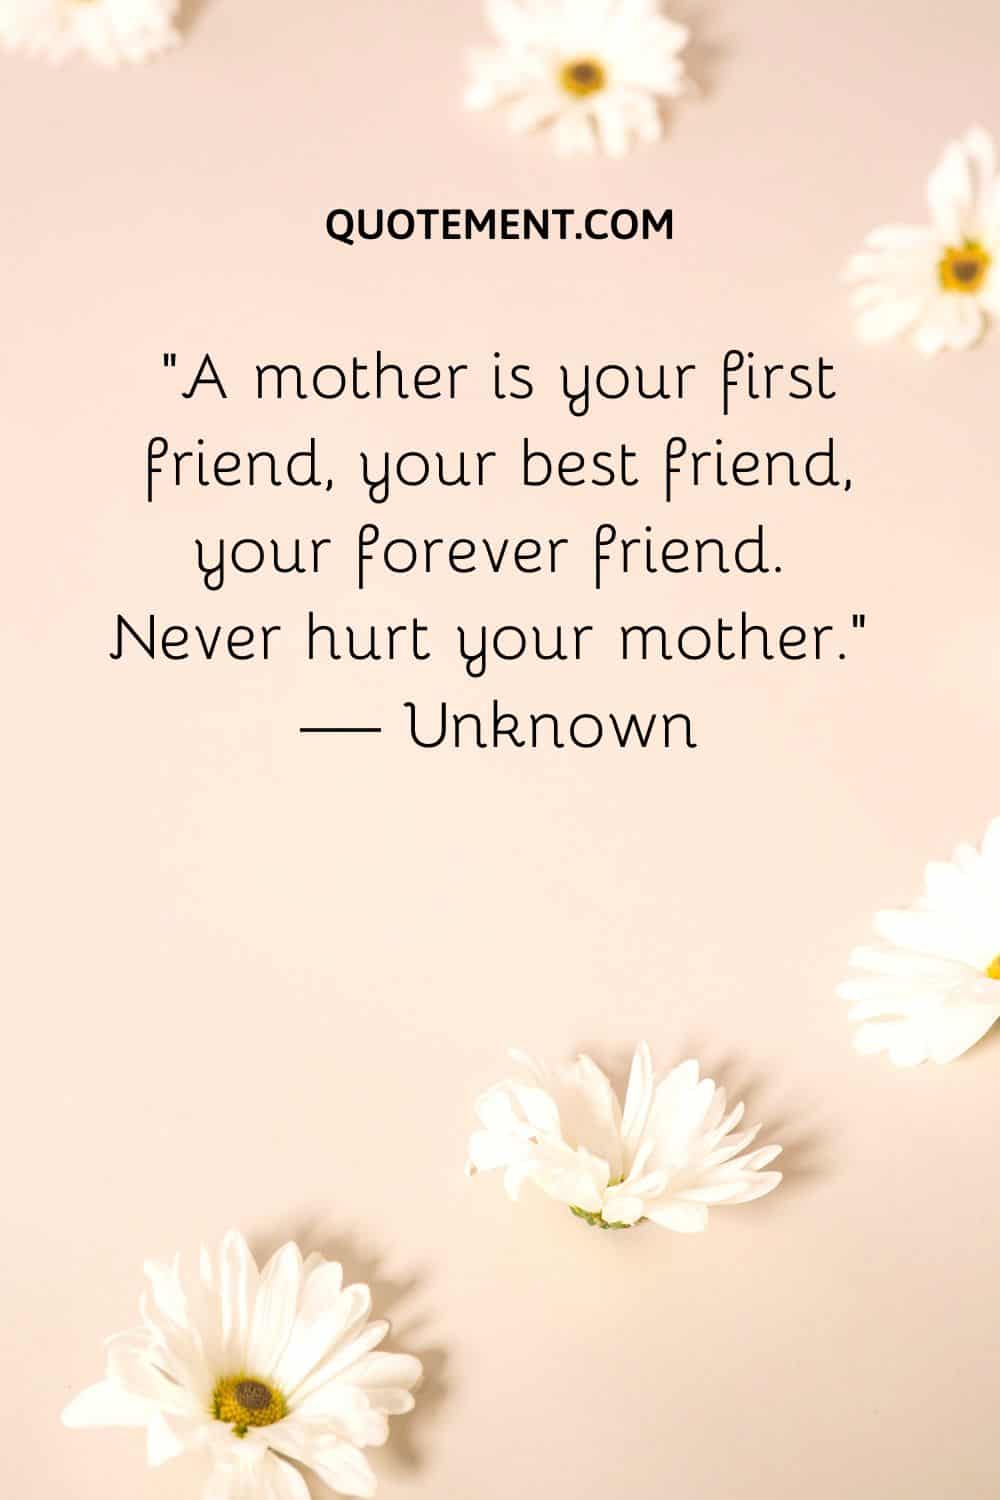 A mother is your first friend, your best friend, your forever friend.